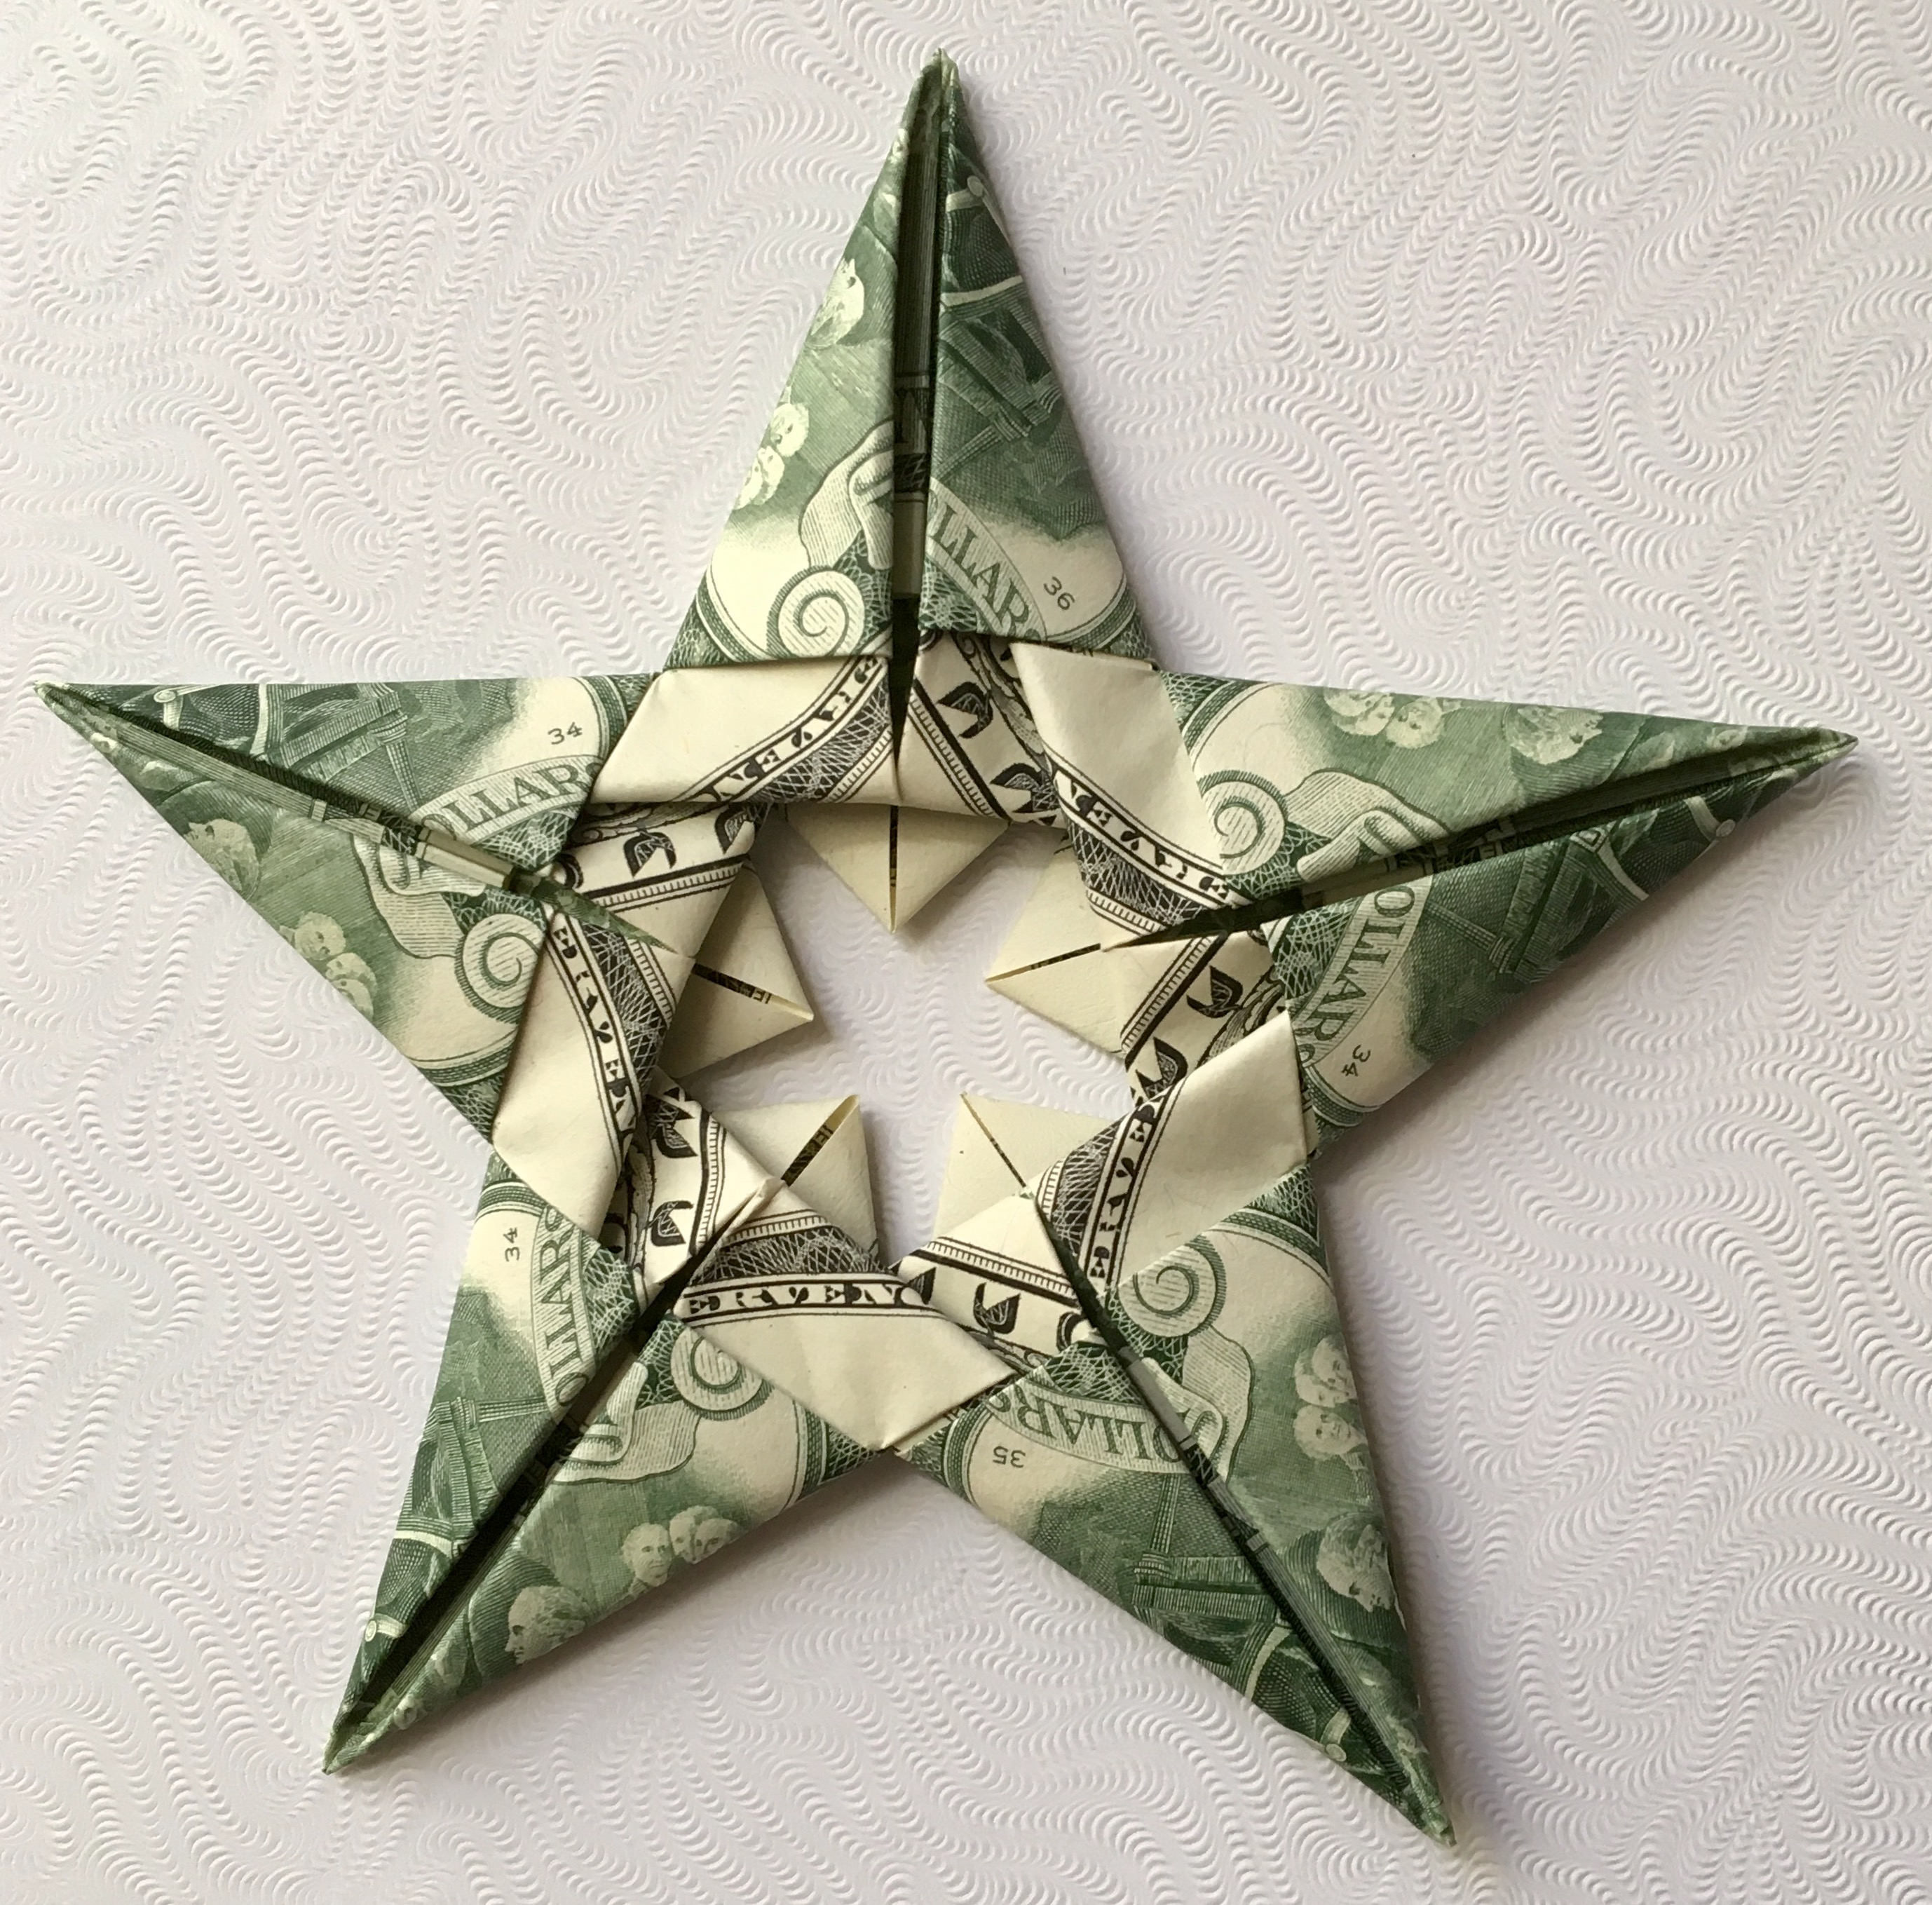 Origami Money Star 5 Point Star Money Origami Constructed With 5 Real Dollar Bills